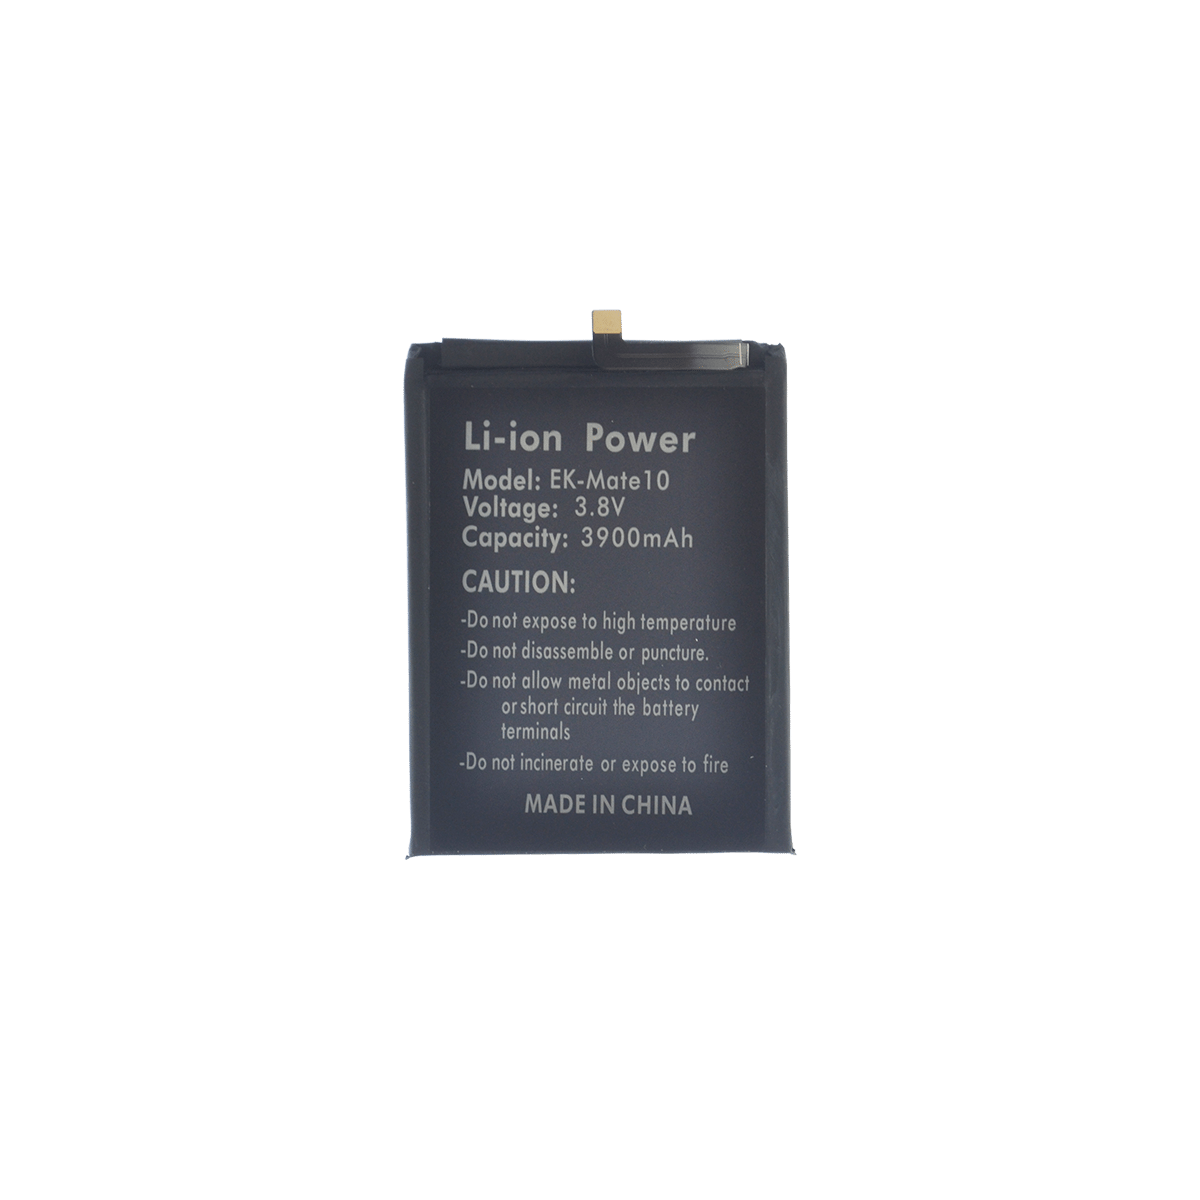 Huawei Mate 10 Battery Replacement